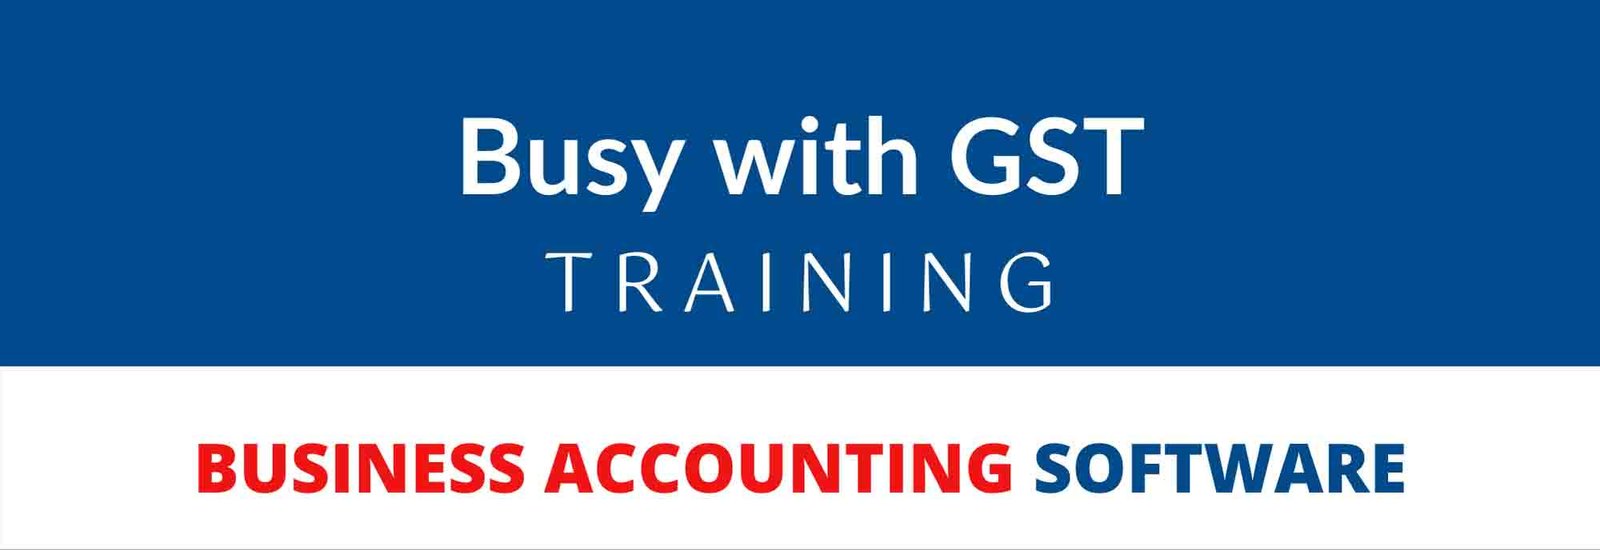 Busy with Gst Training​